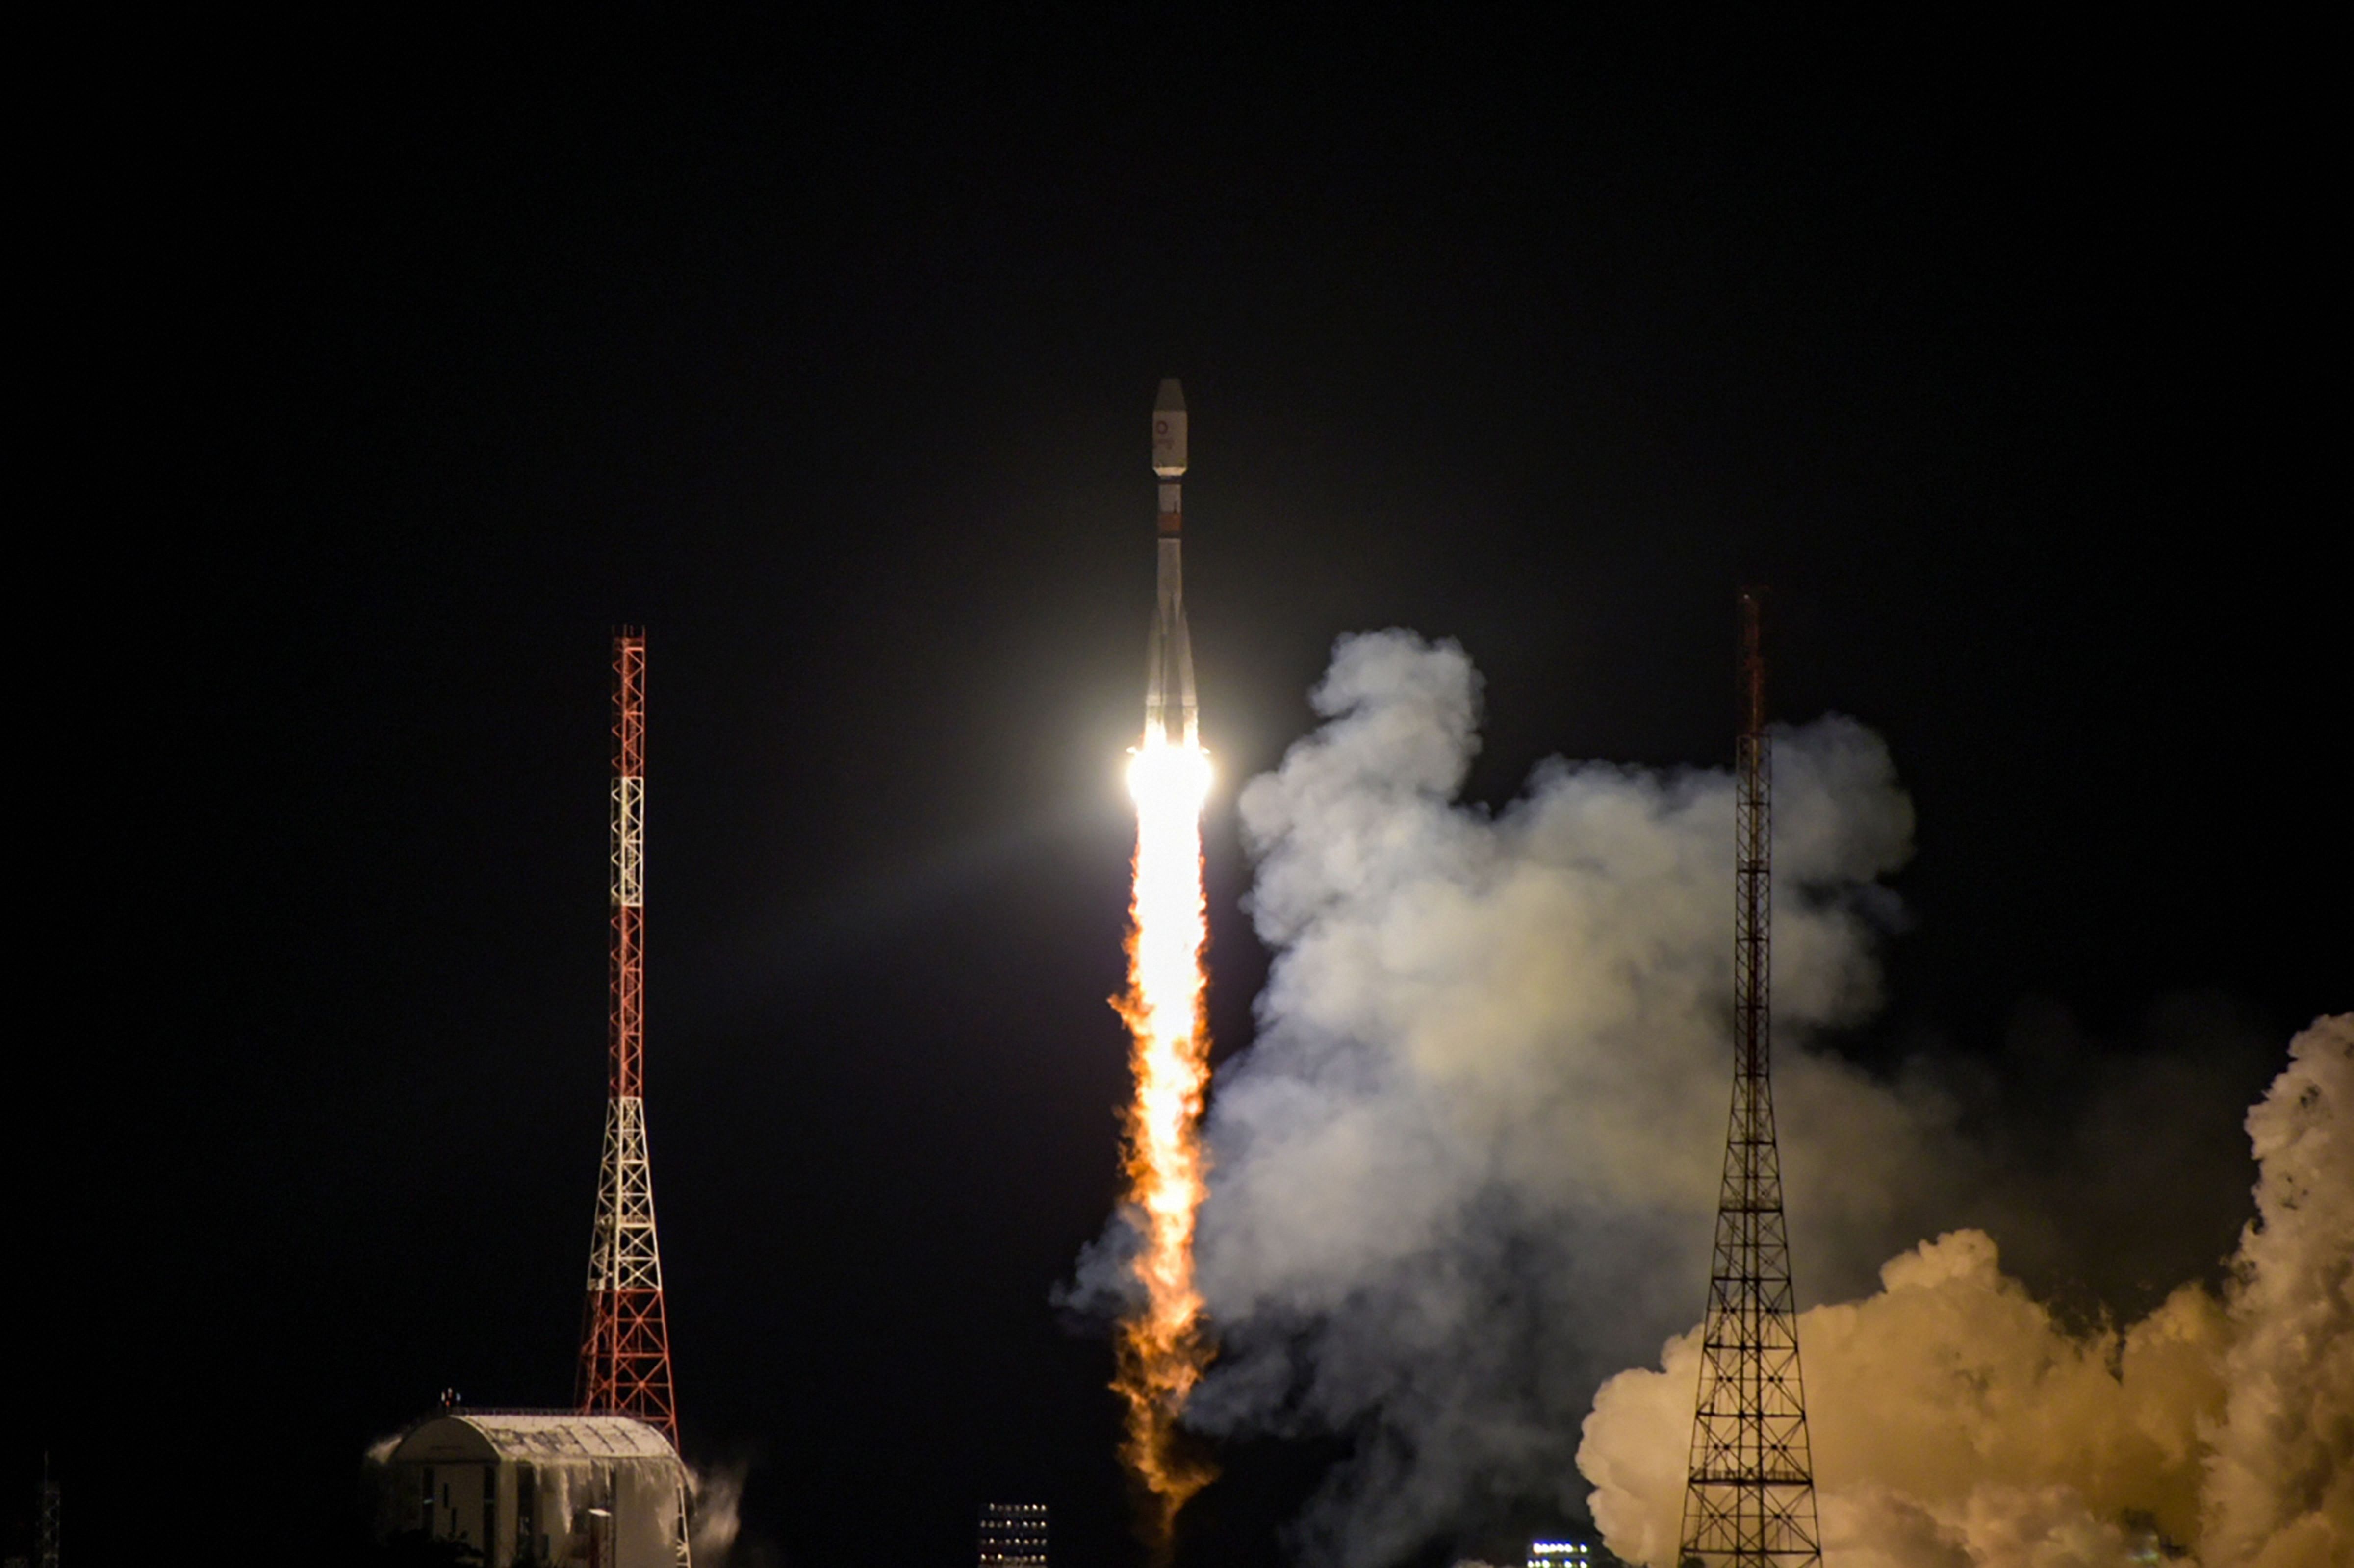 Bharti Global and the UK Government led OneWeb, the Low Earth Orbit (LEO) satellite communications company, launched 36 satellites from a Soyuz launch vehicle, which began from the Vostochny Cosmodrome (Russia), Friday, Dec. 18, 2020. This brings the total in-orbit constellation to 110 satellites, part of OneWeb’s 648 LEO satellite fleet that will deliver high-speed, low-latency global connectivity. Credit: PTI Photo